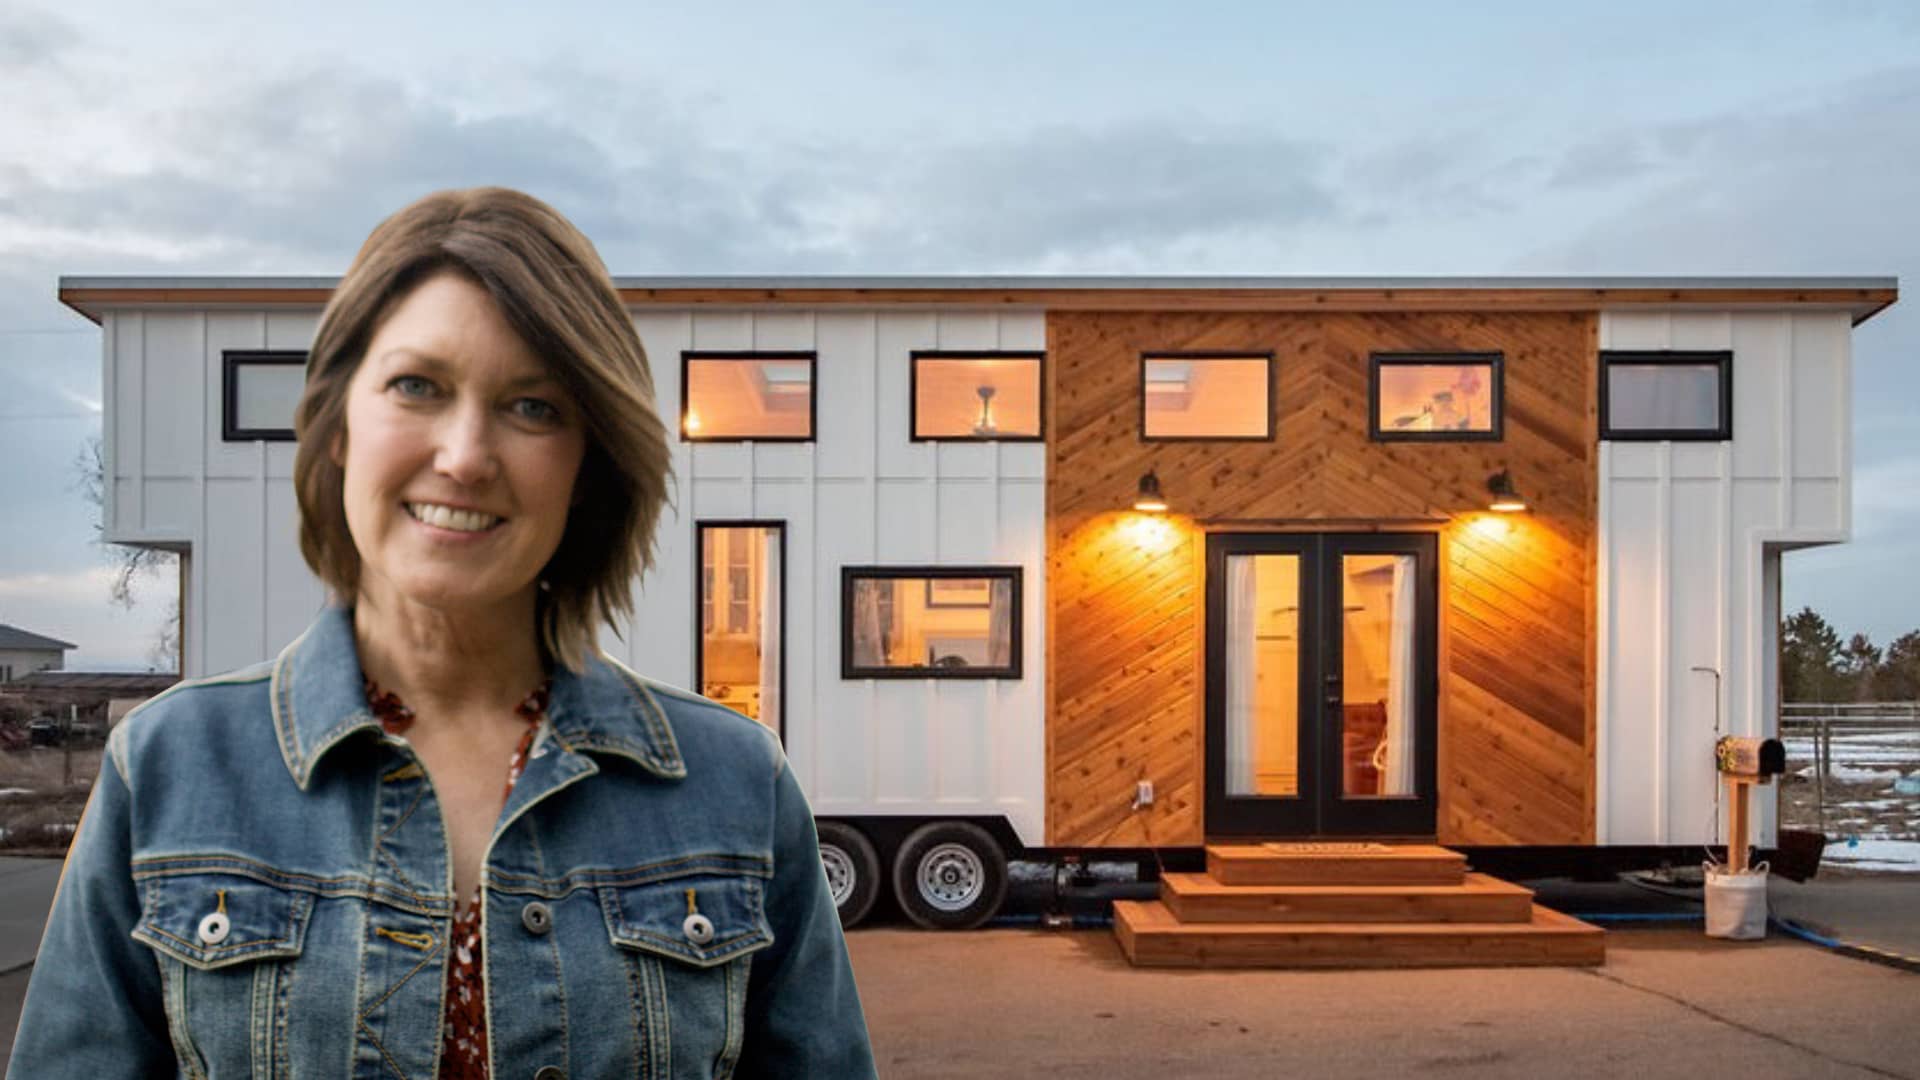 This 51-year-old pays $725 a month to live in a ‘tiny home on wheels’ in someone’s backyard—take a look inside